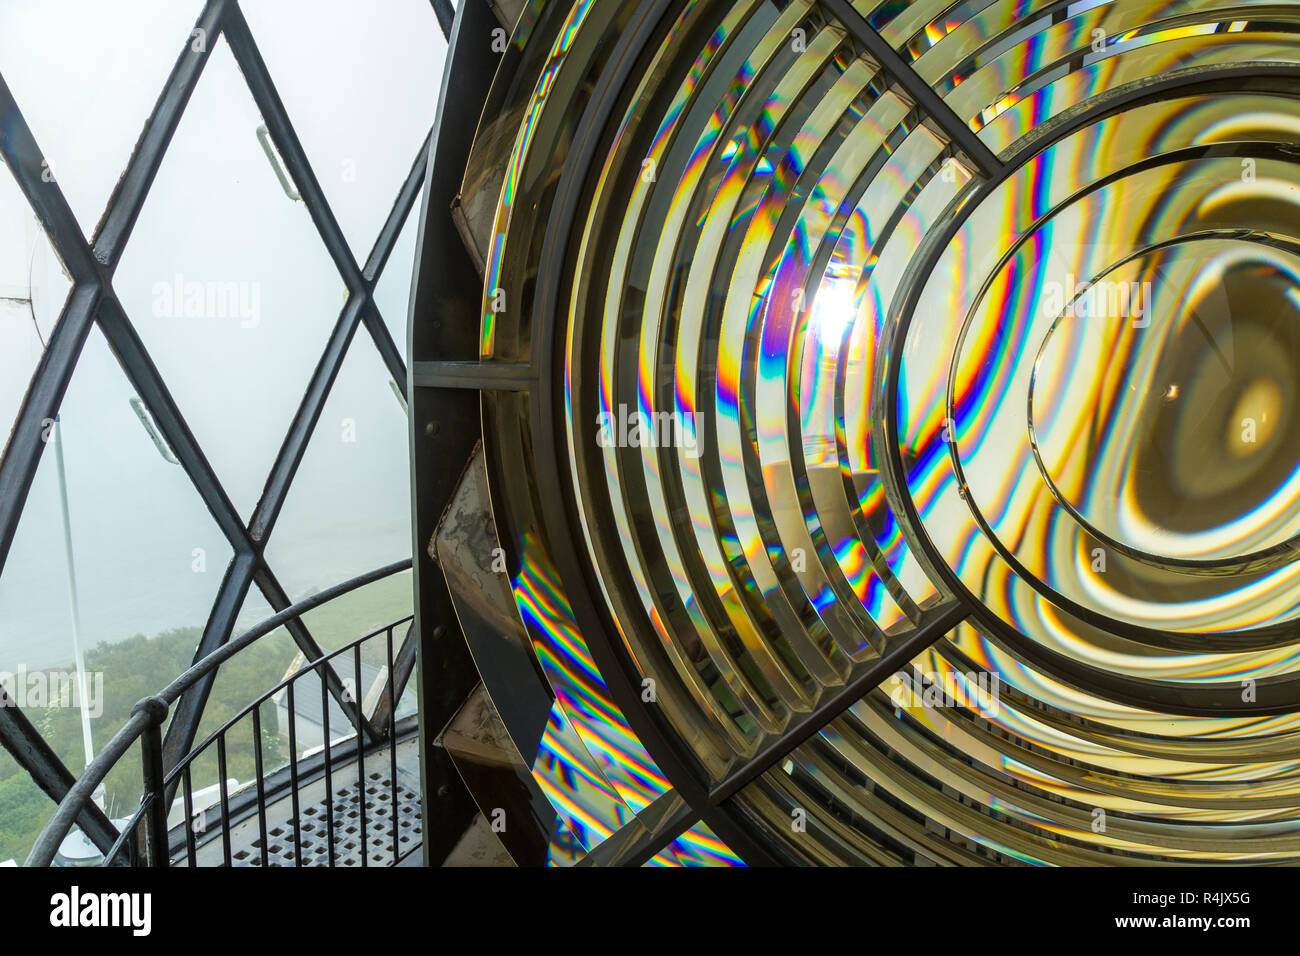 Shaped prisms which concentrate the light house lamp light into super powerful beam using a lightweight Fresnel lens. Saint Catherine's Lighthouse on the Isle of Wight. UK (98) Stock Photo